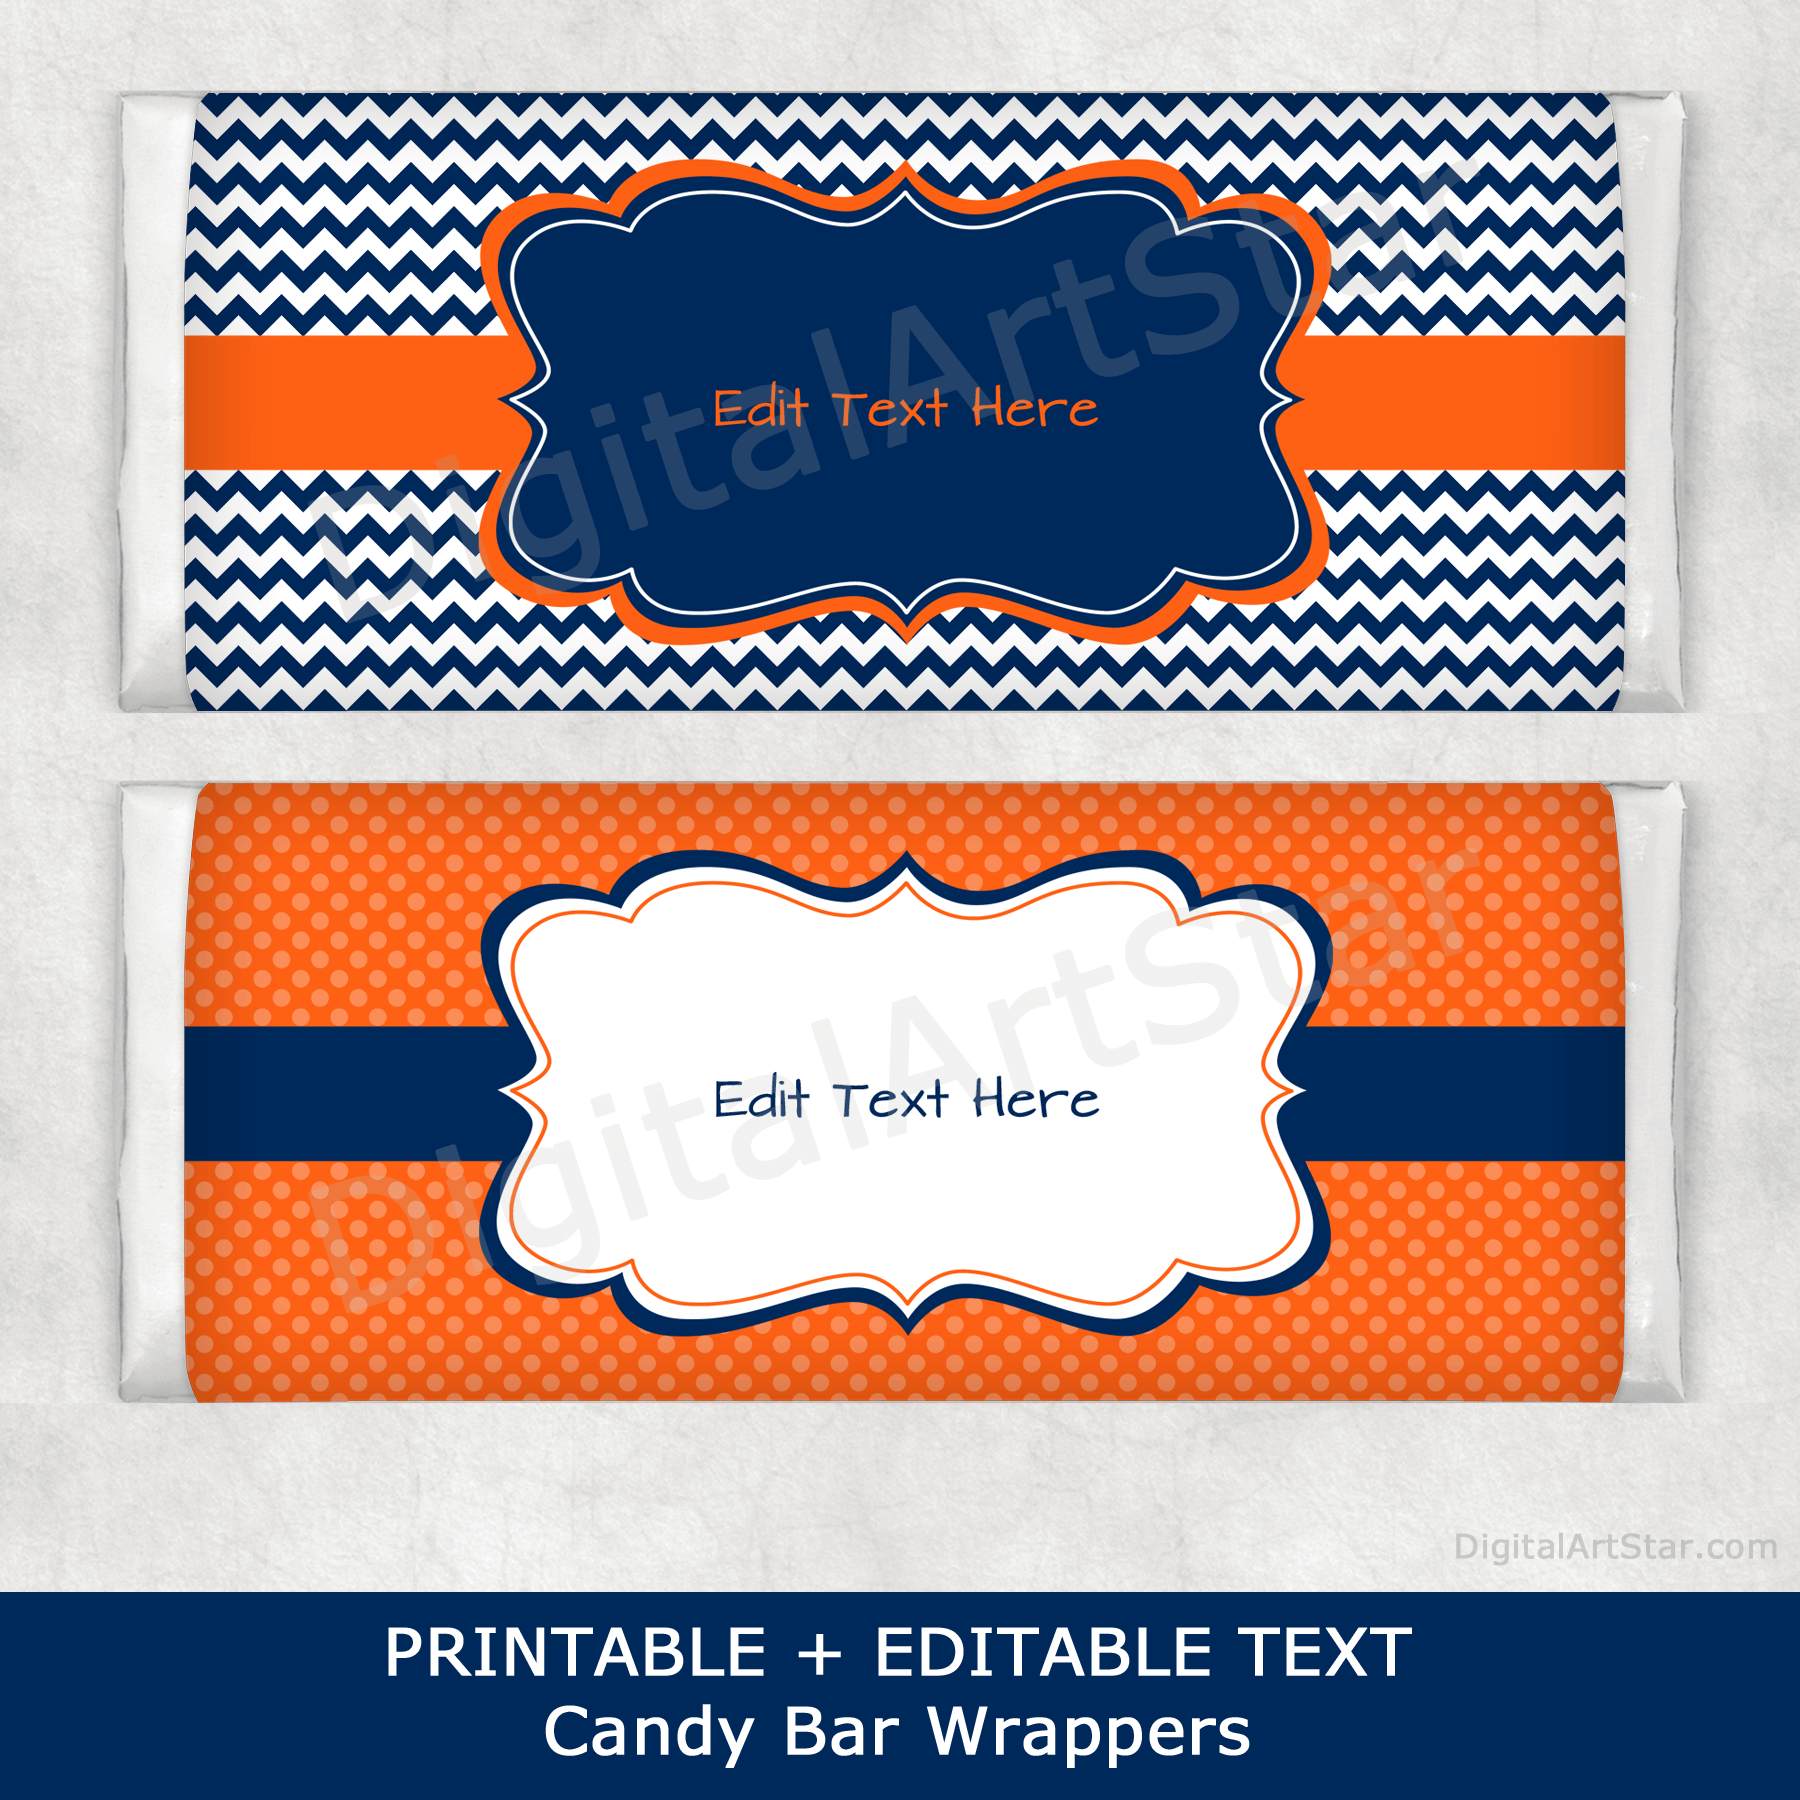 Orange and Navy Blue Printable Candy Bar Wrappers with Editable Text